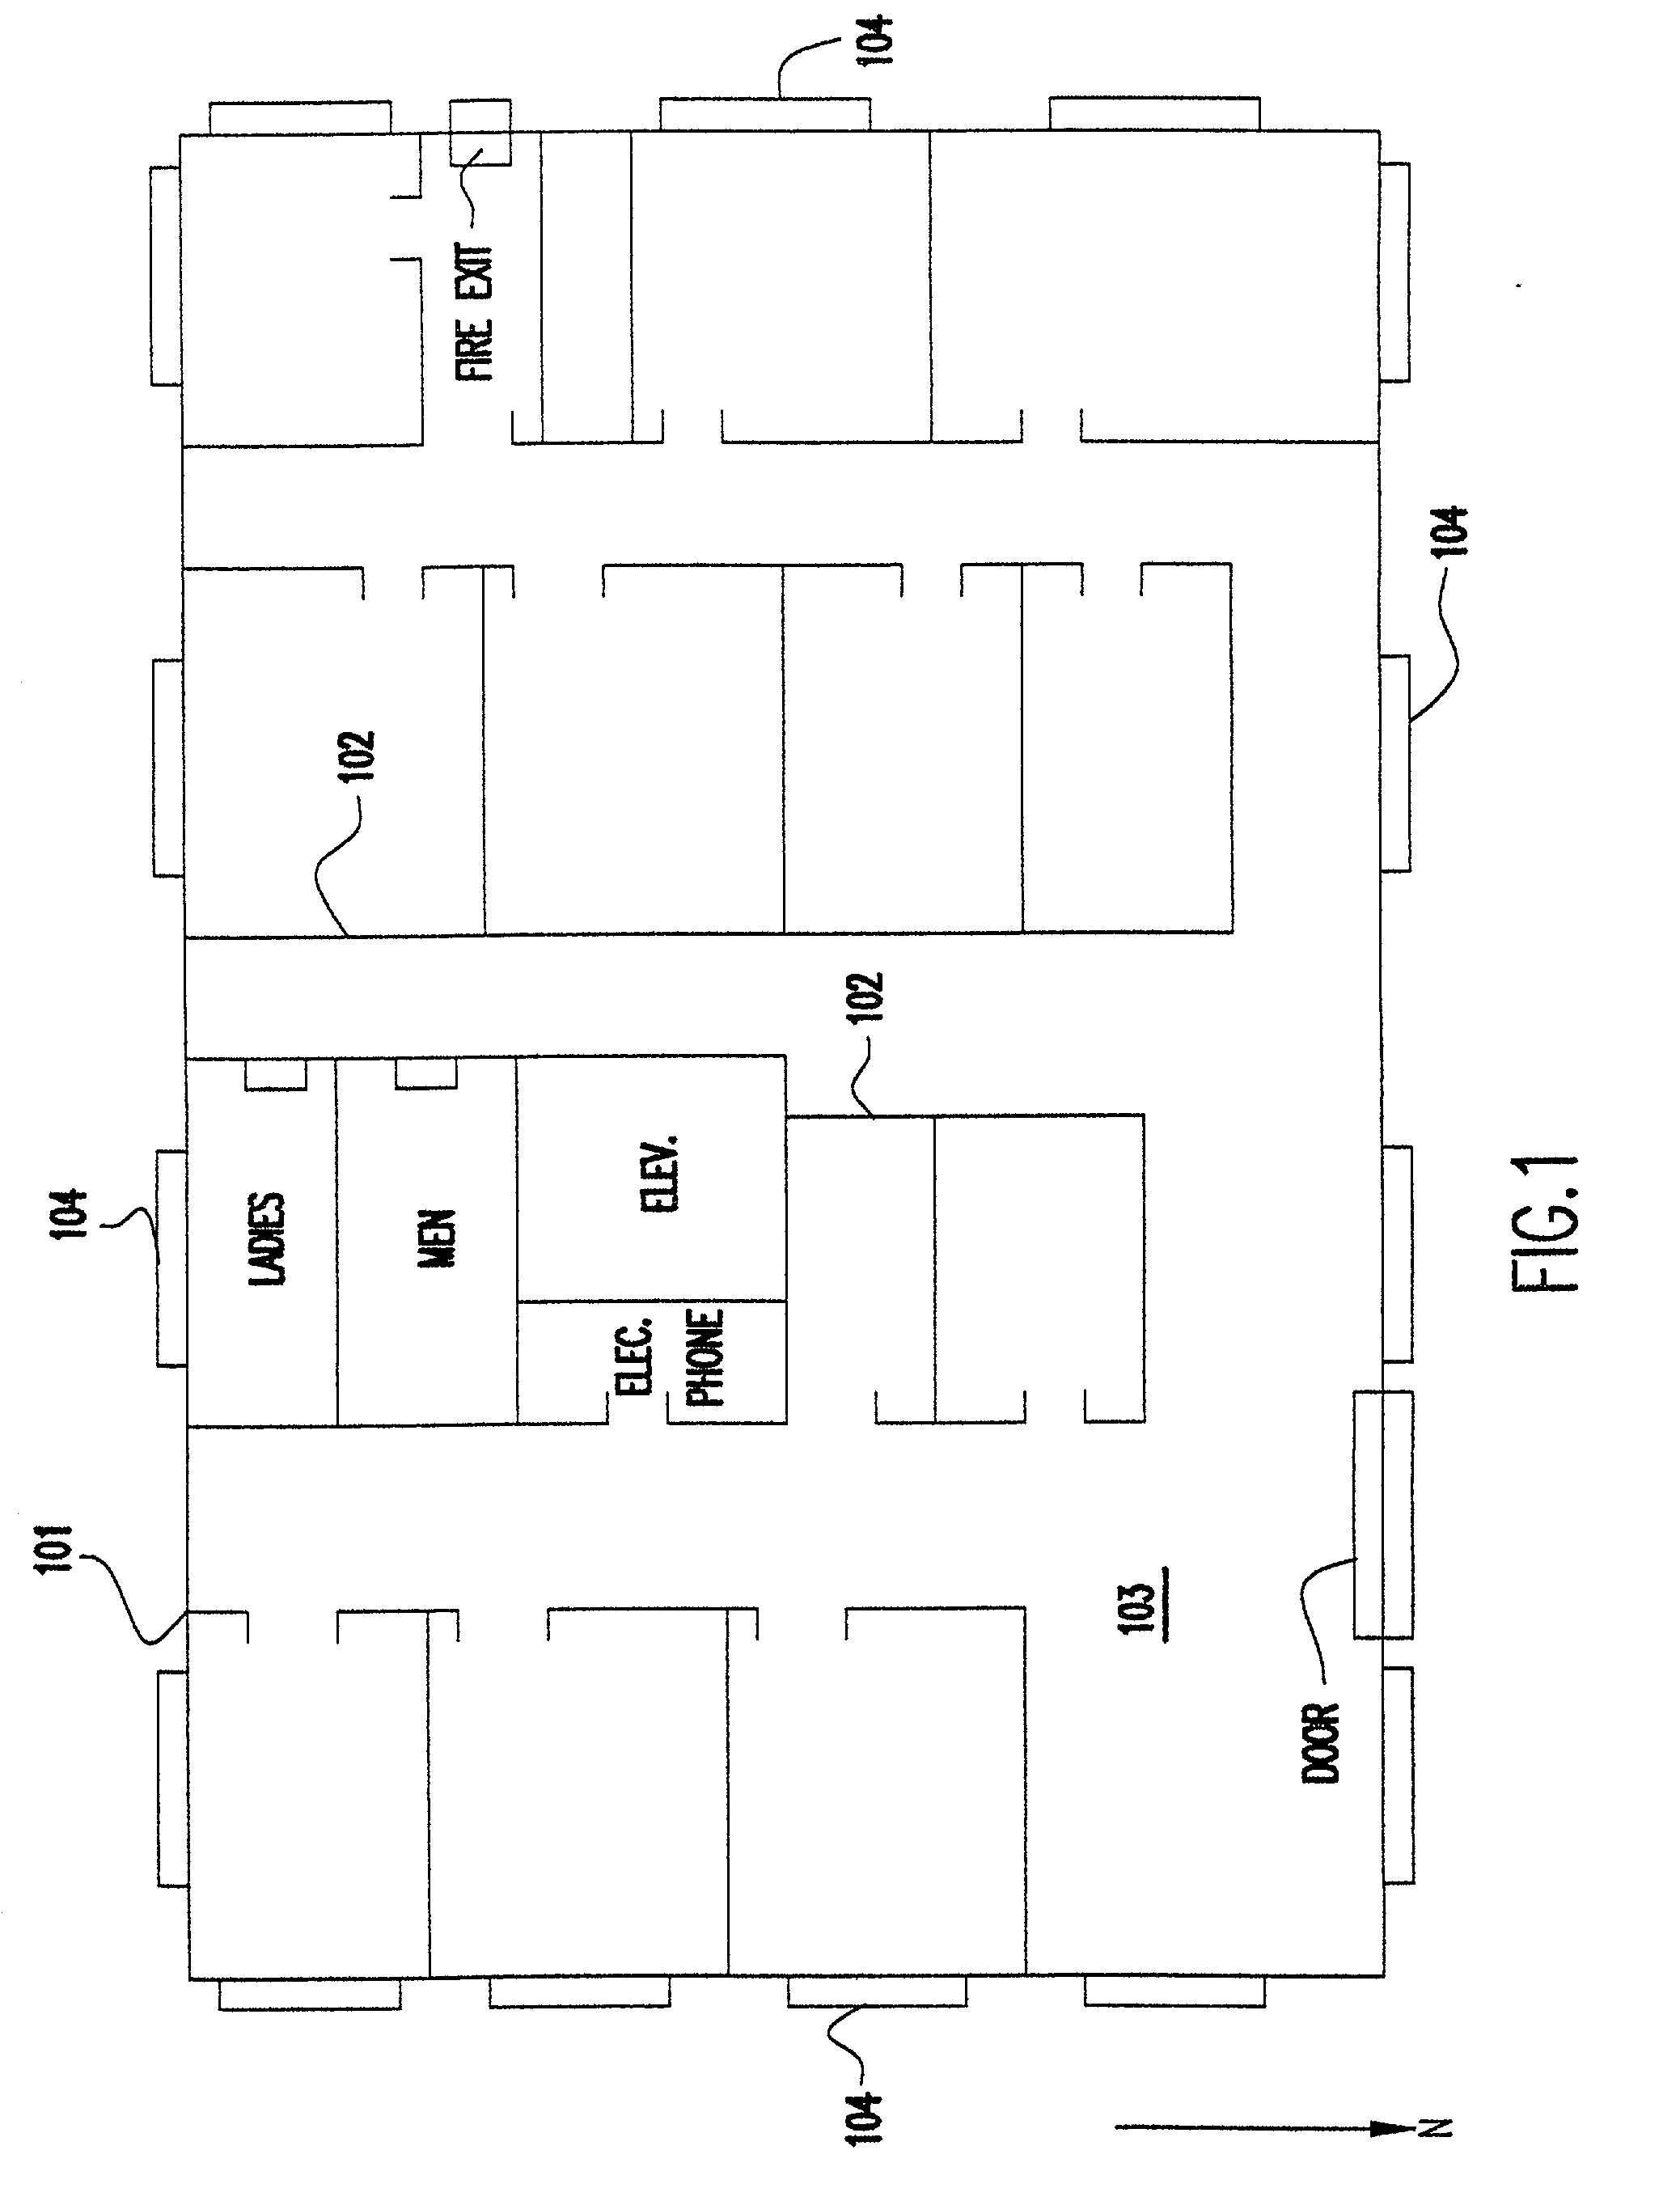 Method and system for analysis, design, and optimization of communication networks